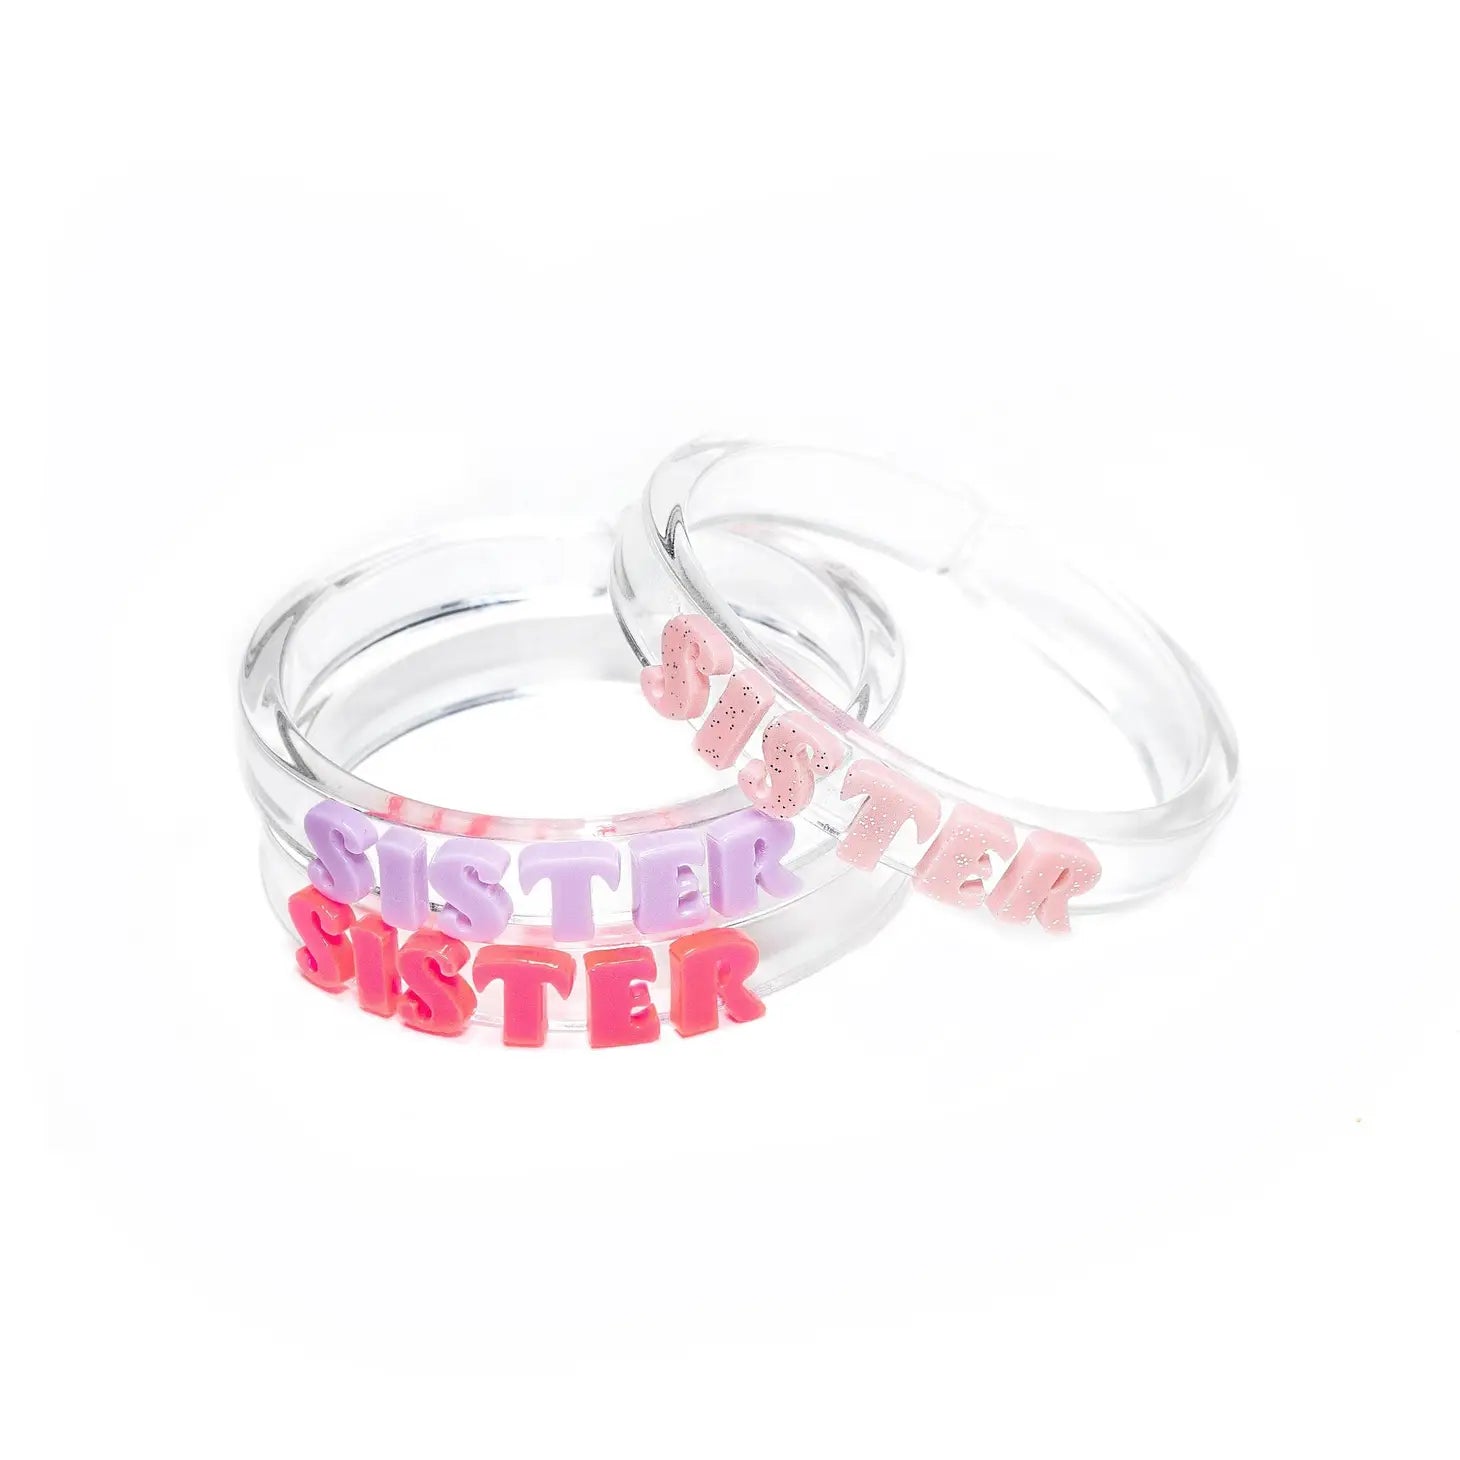 Lilies & Roses Sisters Bangle Set of 3